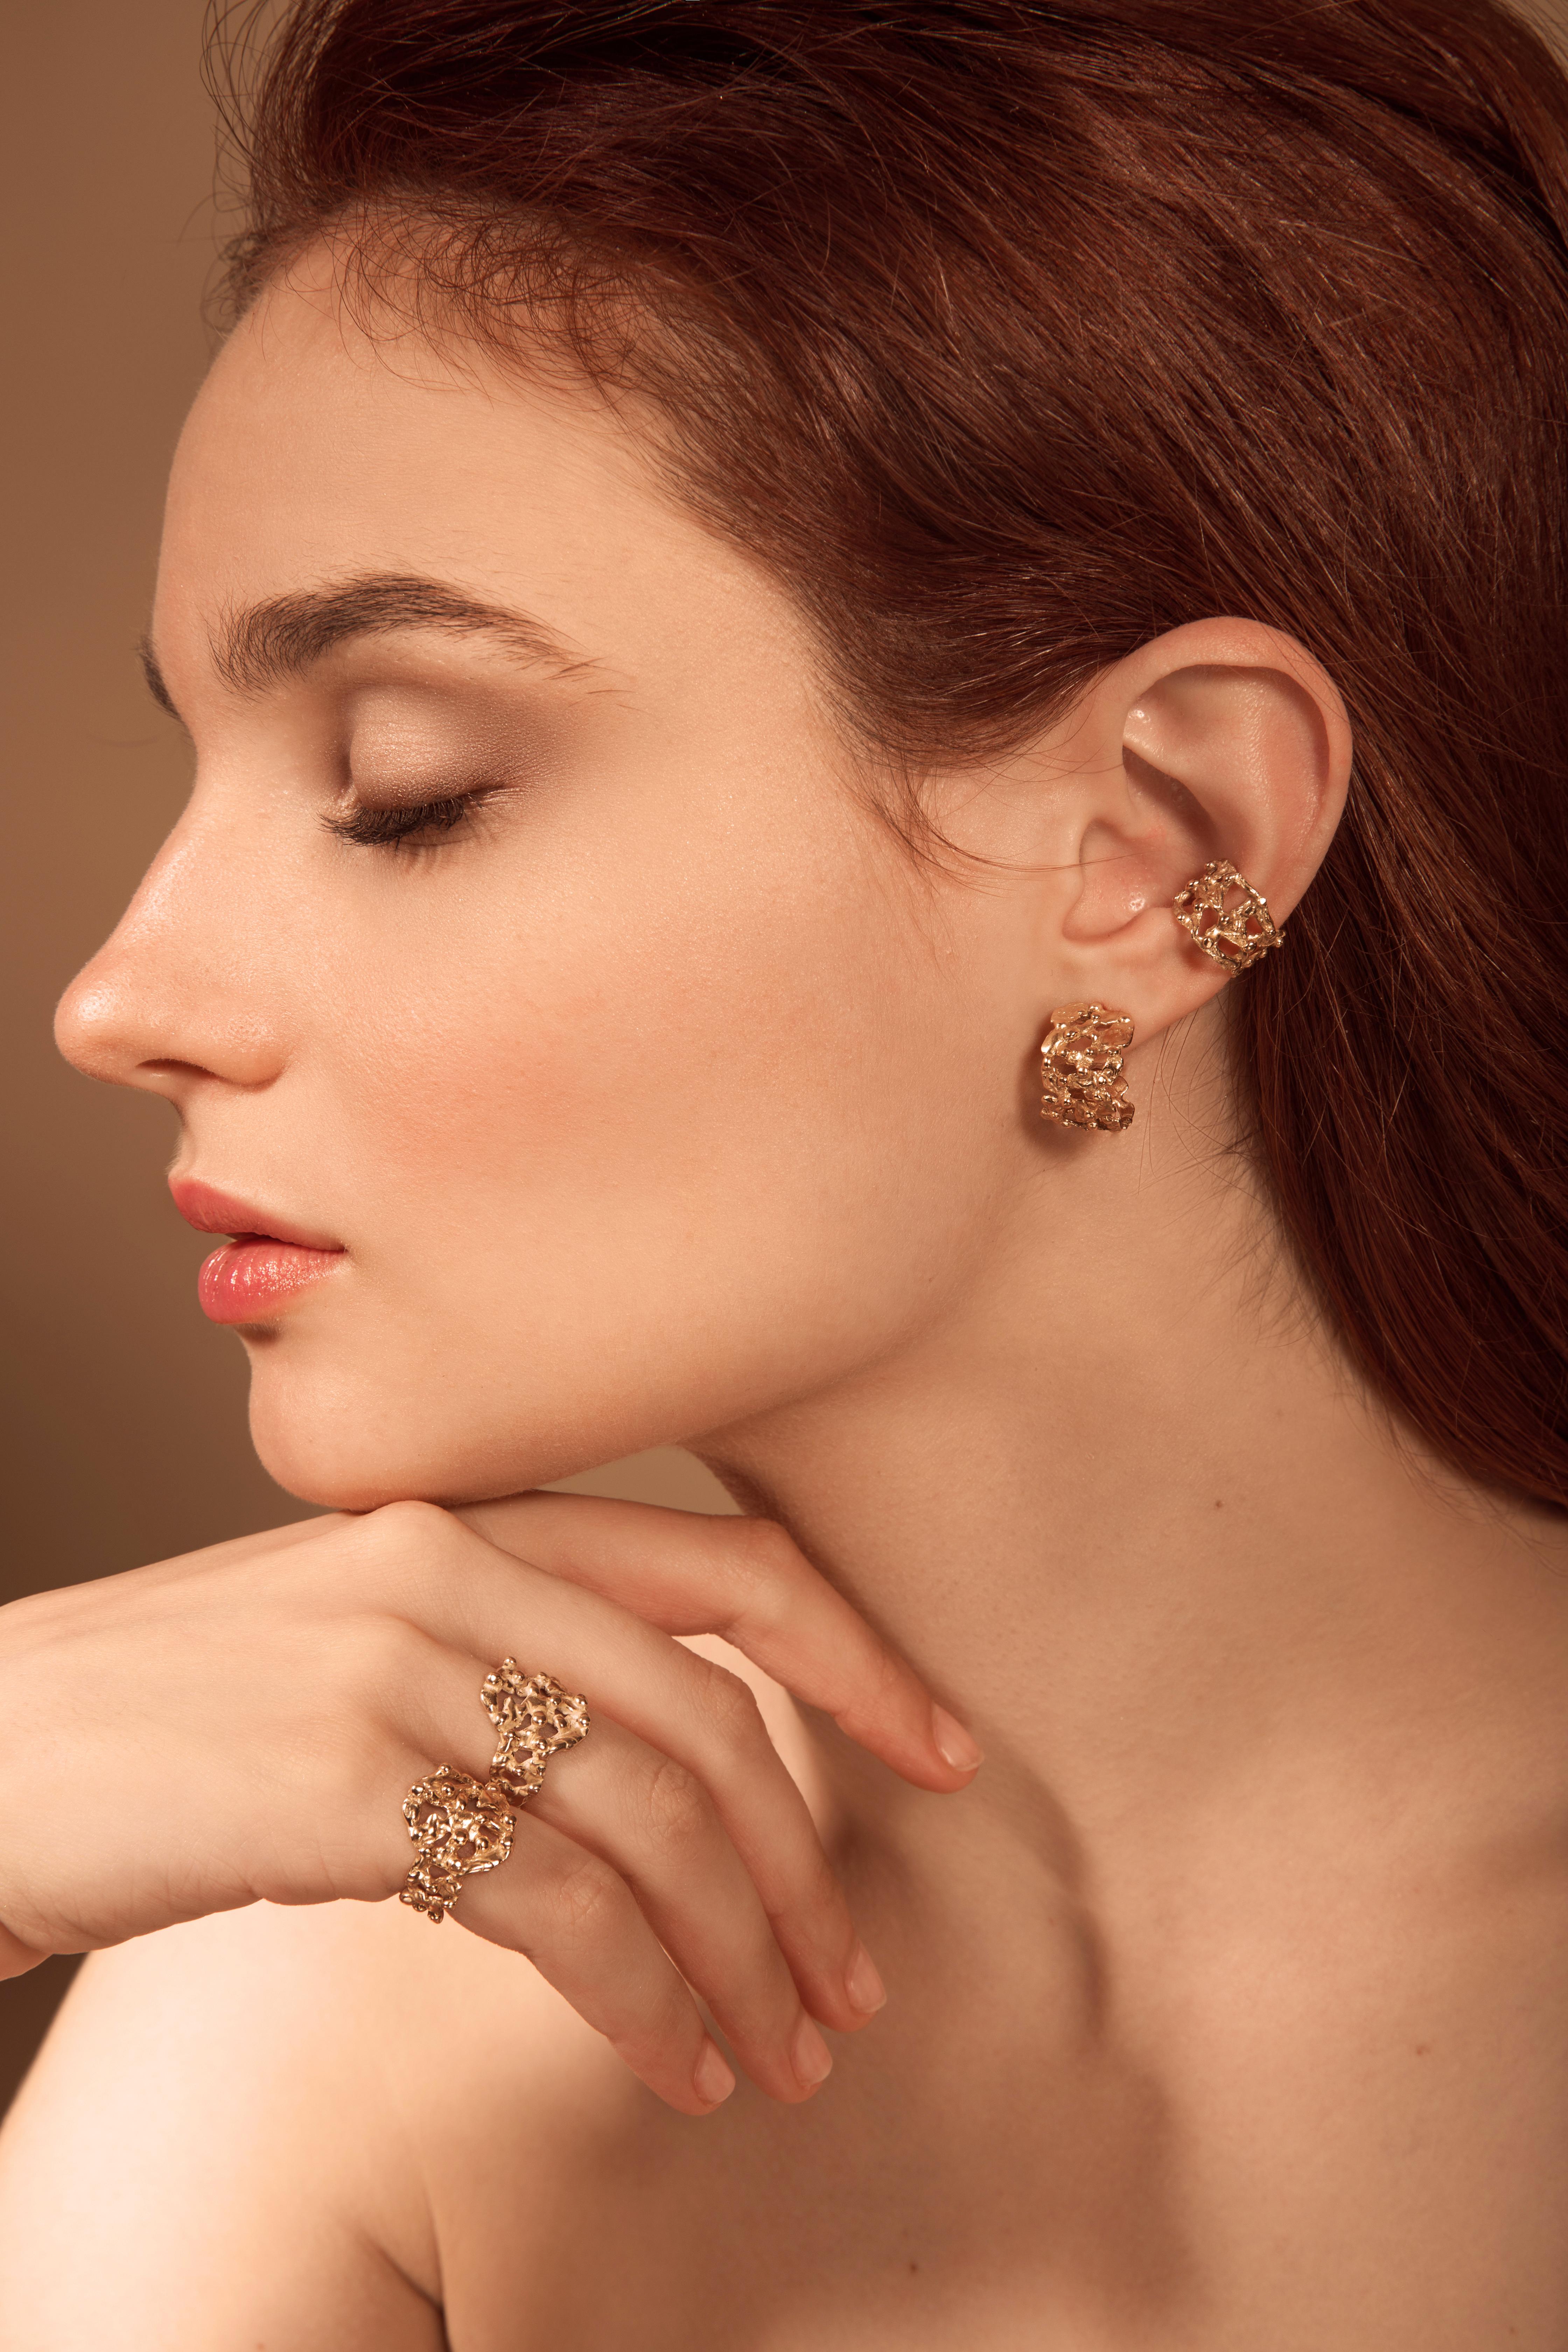 Giulia Barela Jewelry are wearable sculptures. They are limited editions and entirely handmade in Italy by selected goldsmiths in 24kt gold plated bronze and 925 silver, using traditional Italian artisanal techniques.